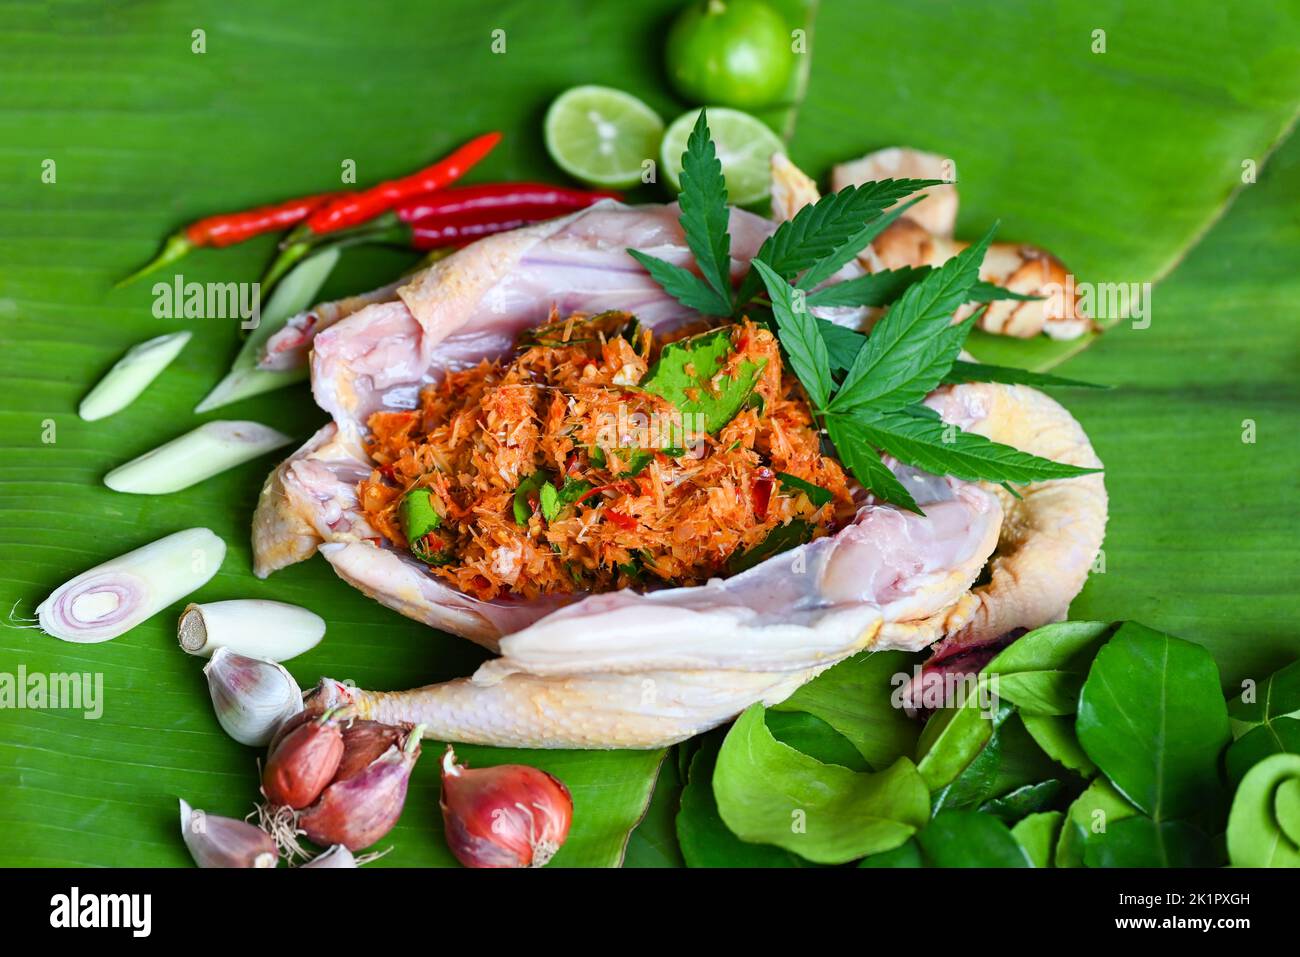 Cannabis food for cooking with fresh chicken cannabis leaf marijuana vegetables herbs and spices ingredients on banana leaf background, raw chicken he Stock Photo